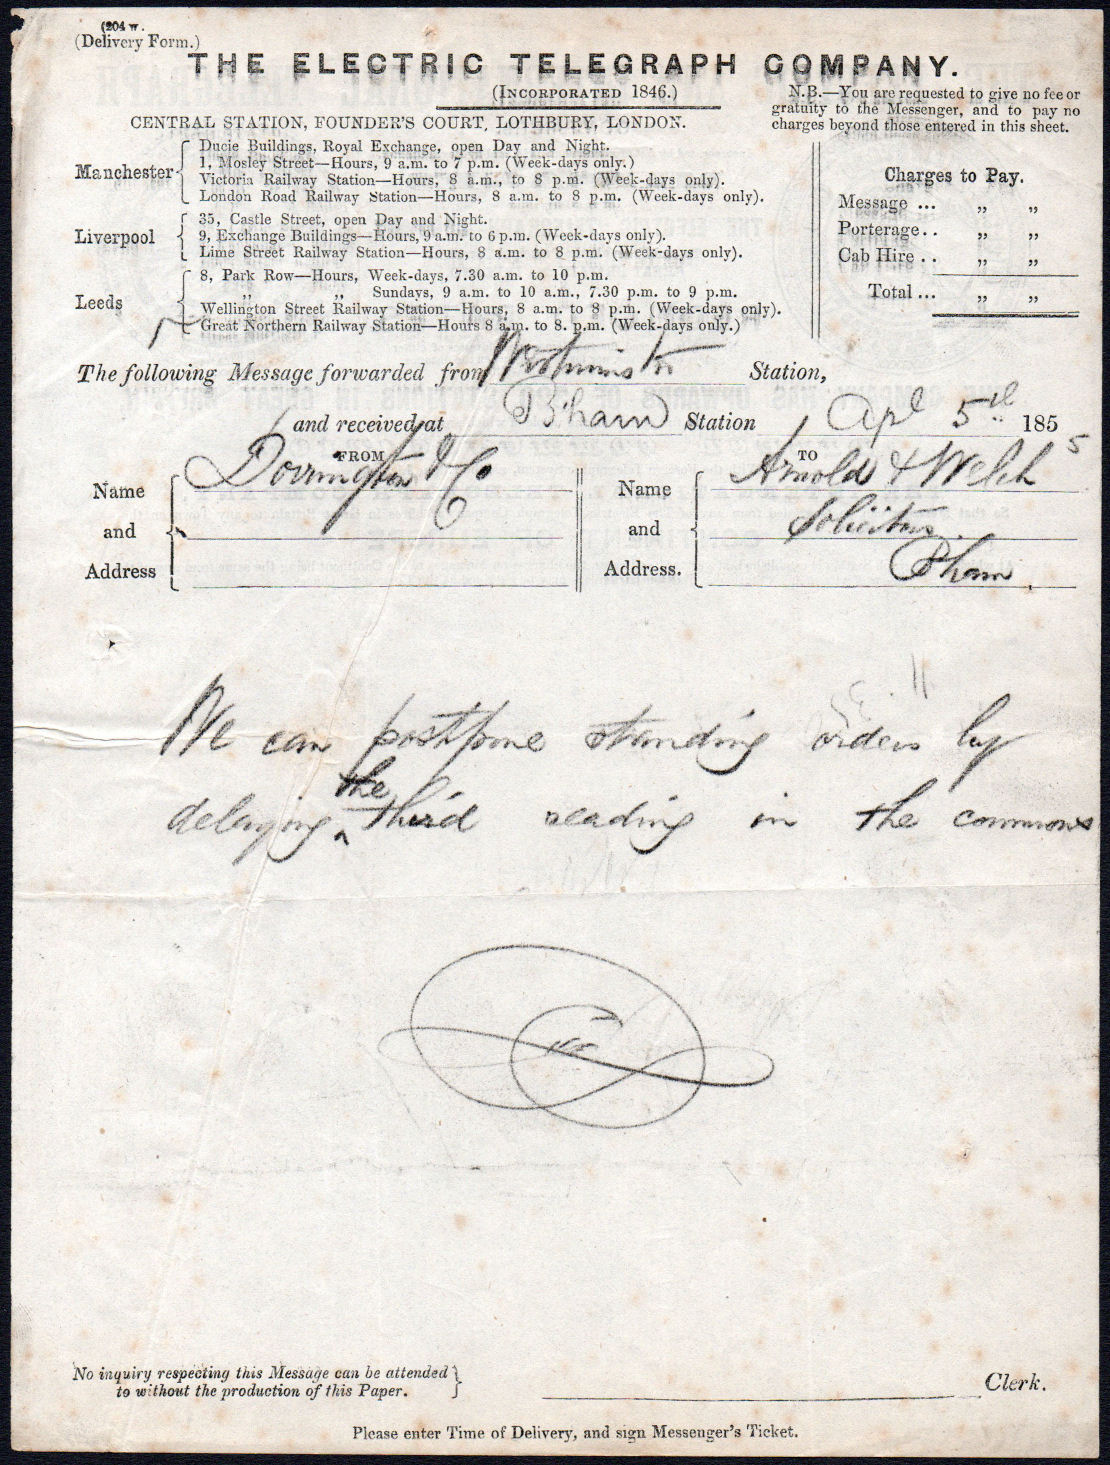 Electric Telegraph Company Stationery 1855 - front.